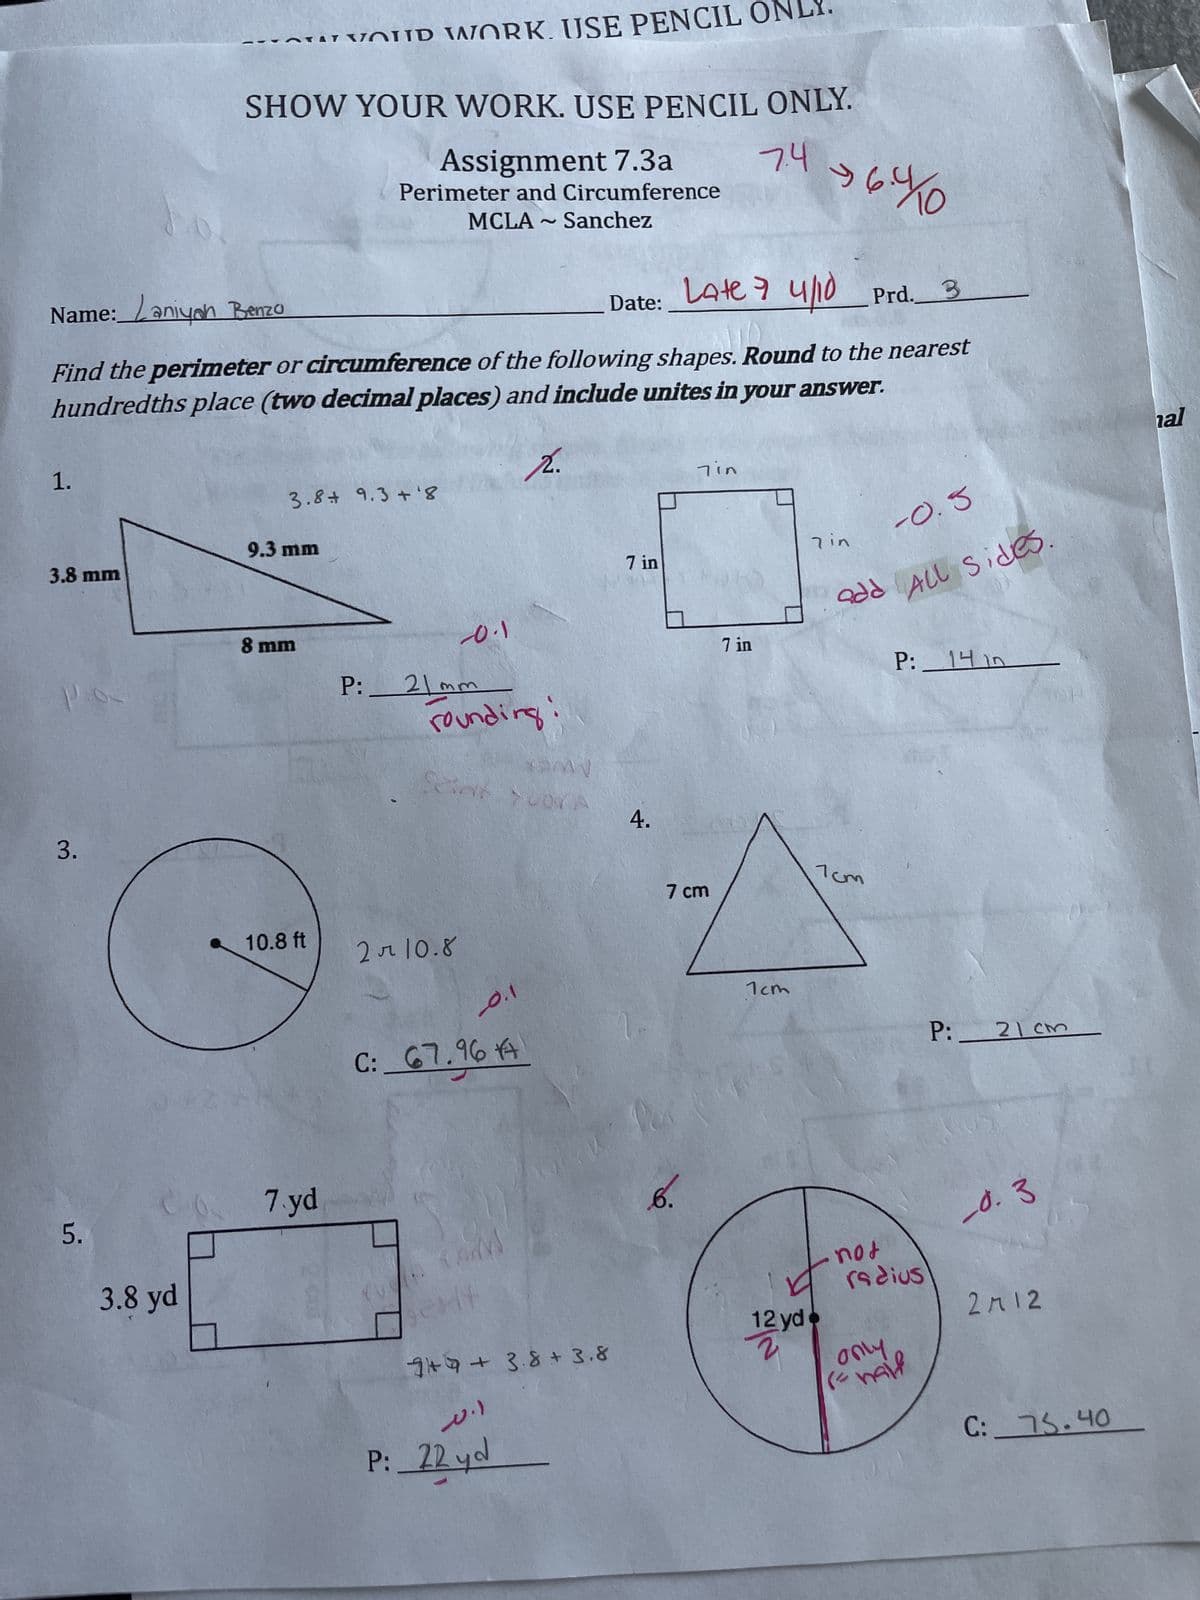 5.
YOUR WORK. USE PENCIL ONLY.
SHOW YOUR WORK. USE PENCIL ONLY.
Assignment 7.3a
Perimeter and Circumference
Name: Laniyah Benzo
MCLA
2
Sanchez
7.4
$6.4 10
Date:
Late 7 4/10 Prd.
3
Find the perimeter or circumference of the following shapes. Round to the nearest
hundredths place (two decimal places) and include unites in your answer.
1.
3.8 9.3+ '8
2.
3.8 mm
9.3 mm
3.
3.8 yd
8 mm
-0.1
P: 21mm
rounding
4.
7 in
7in
-0.3
7 in
7 in
add All Sides.
P: 14 in
10.8 ft
2 л 10.8
C: 67.96
0.1
7 cm
7cm
7cm
P: 21 cm
7.yd
AM
CHY
749+ 3.8+ 3.8
ا.
P:
20.)
22 yd
6.
12 yd
2
YN
not
radius
only
(= half
-0.3
2712
C: 75.40
hal